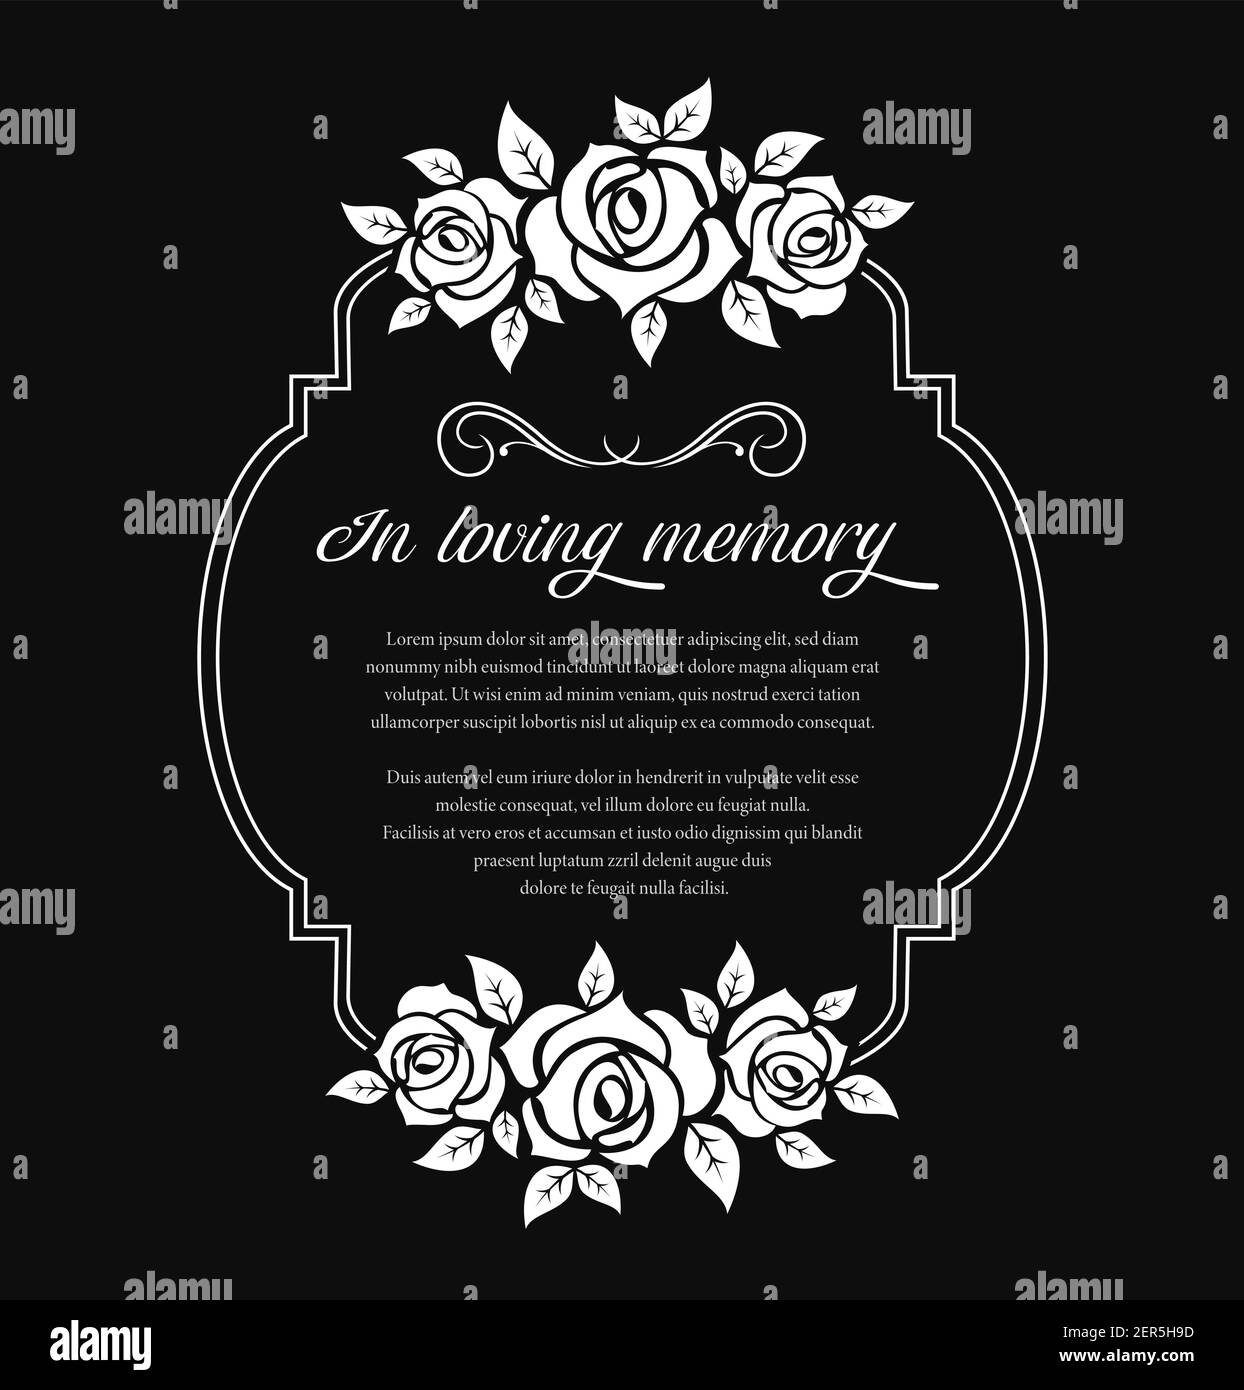 Funeral frame with mourning condolence and roses flowers. Funerary vector frame with in loving memory obituary condolence and floral ornament. Mortuar Stock Vector